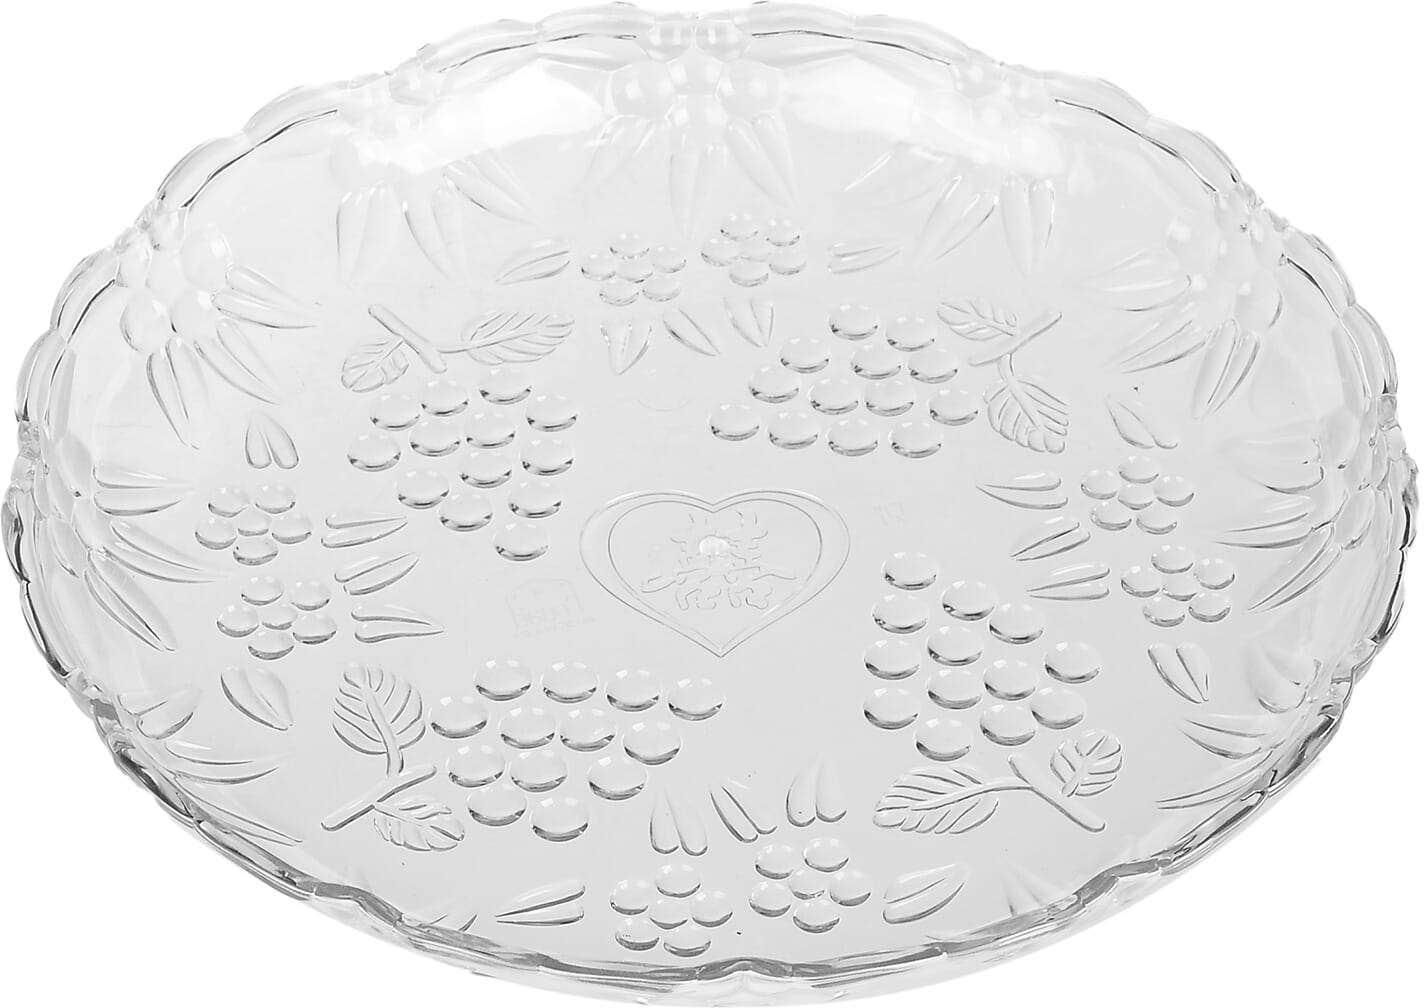 Get Fouad Round Acrylic Tray, 35.5 x35.5 x5 cm - Clear with best offers | Raneen.com